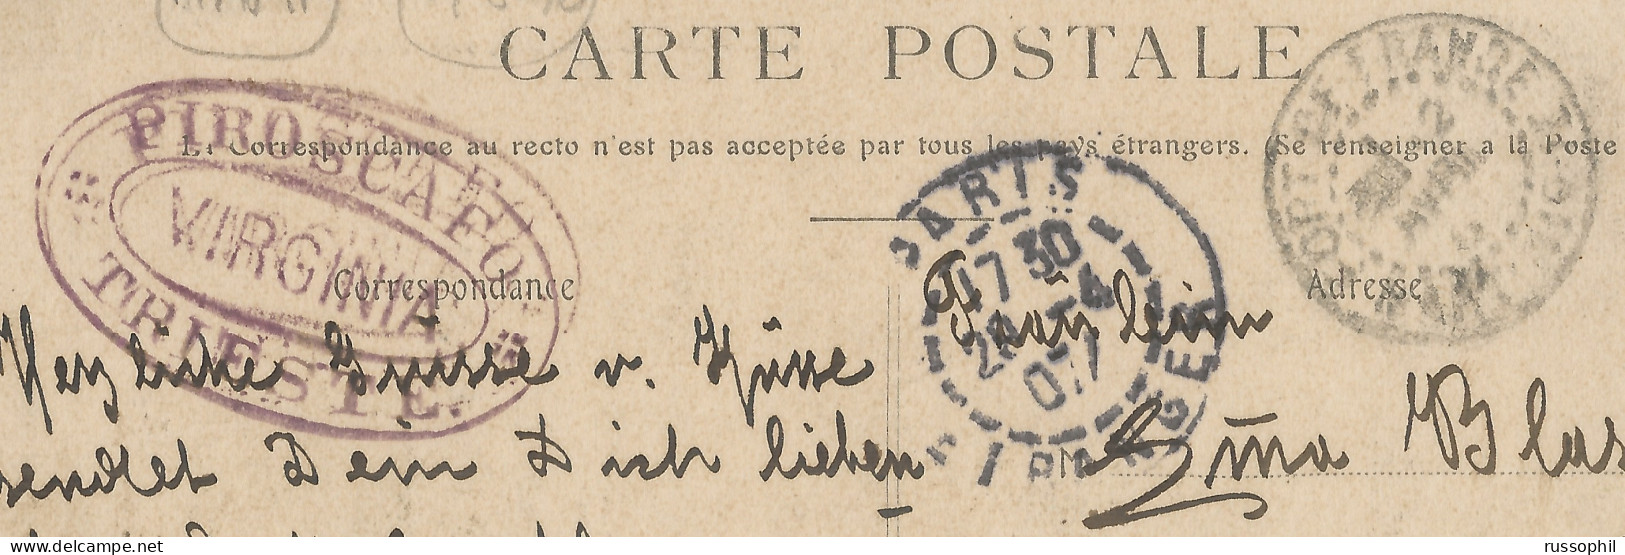 MARTINIQUE - MISDIRECTED PC SENT FROM FORT DE FRANCE TO TRIESTE INSTEAD OF VIENNA -  "PIROSCAFO VIRGINIA" - 1907 - Storia Postale